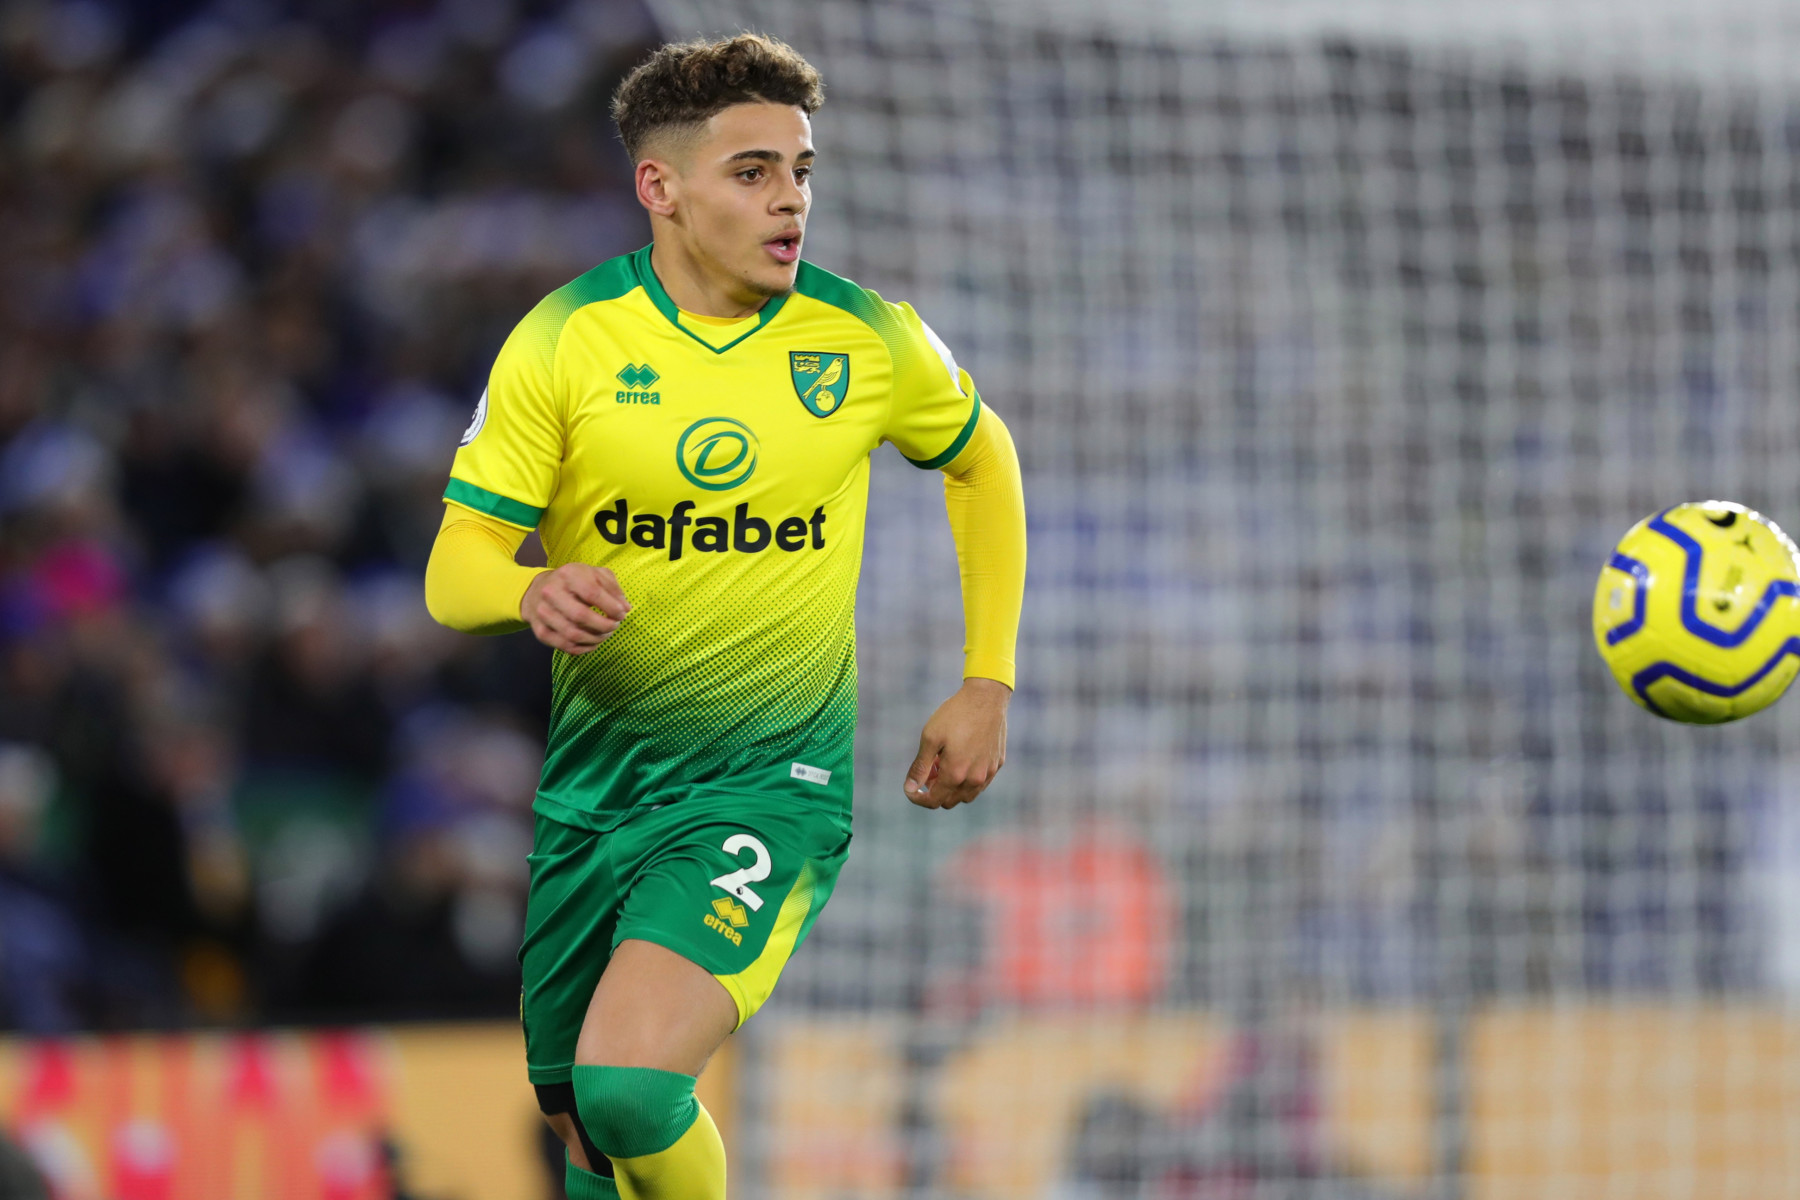 Max Aarons has also attracted interest from Ole Gunnar Solskjaer’s side.